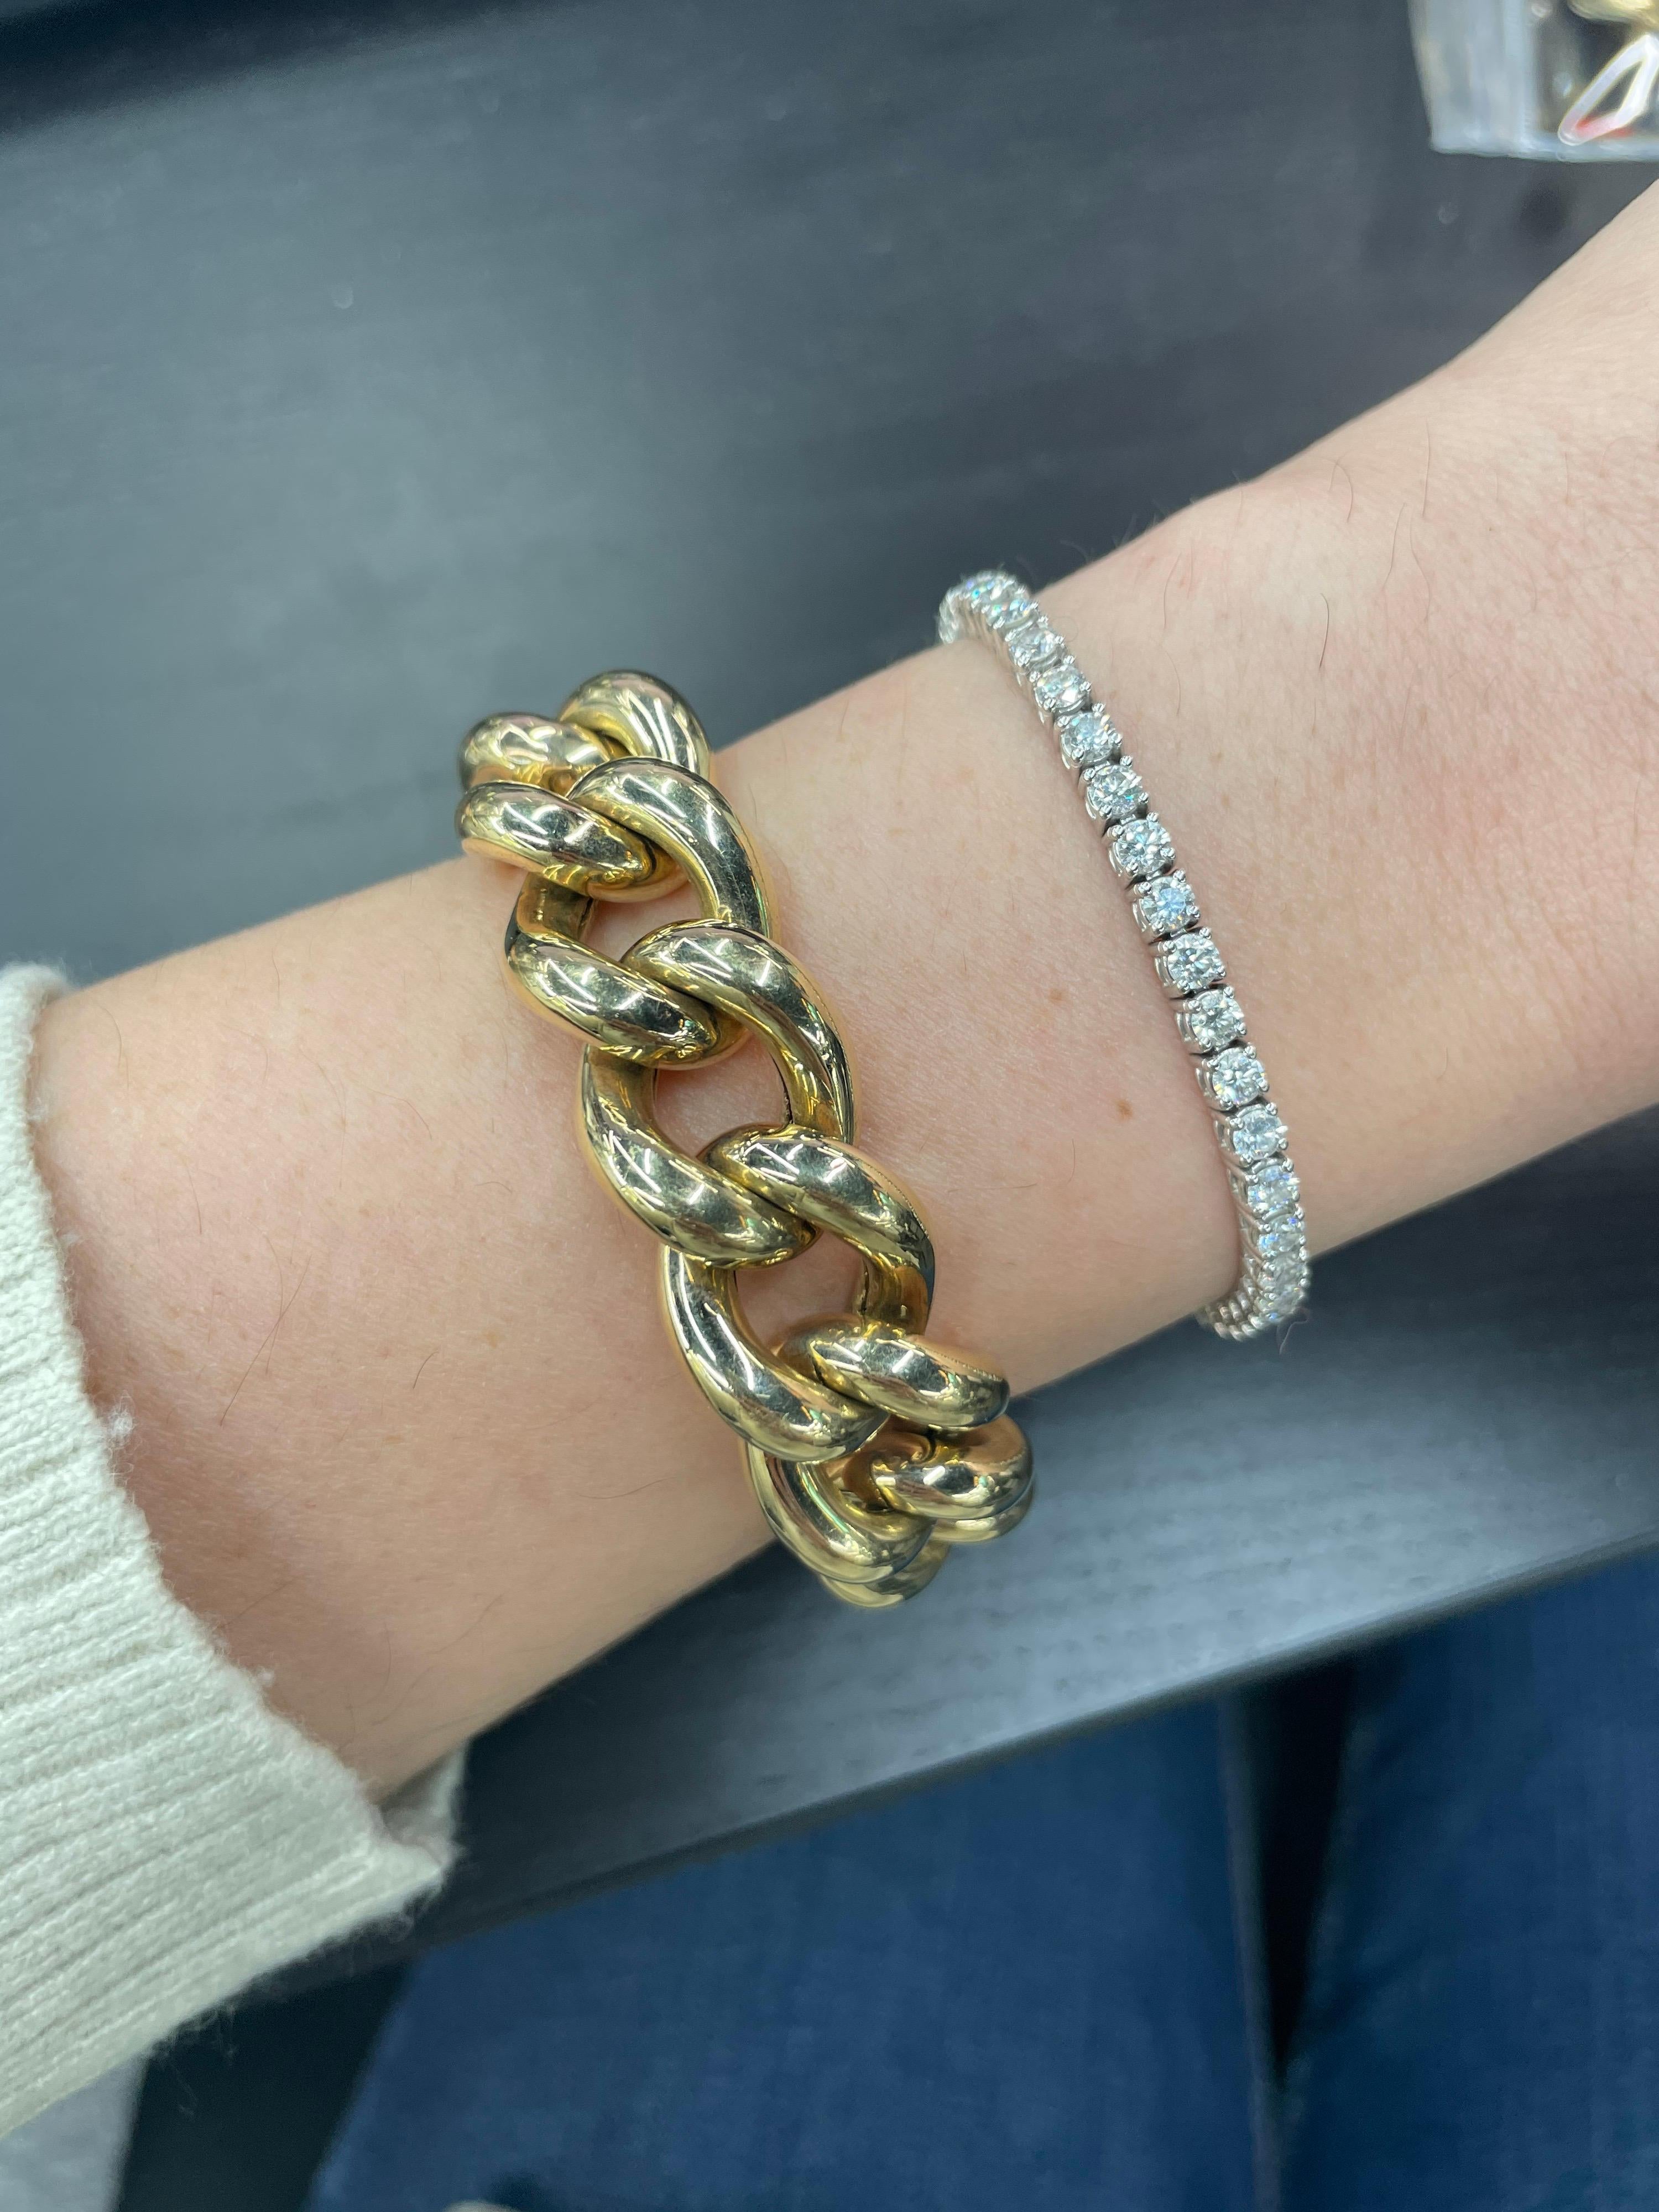 14 Karat yellow gold bracelet 16 links weighing 53.4 grams.
Can be shortened.
More link bracelets available.
Email for more pictures and styles!